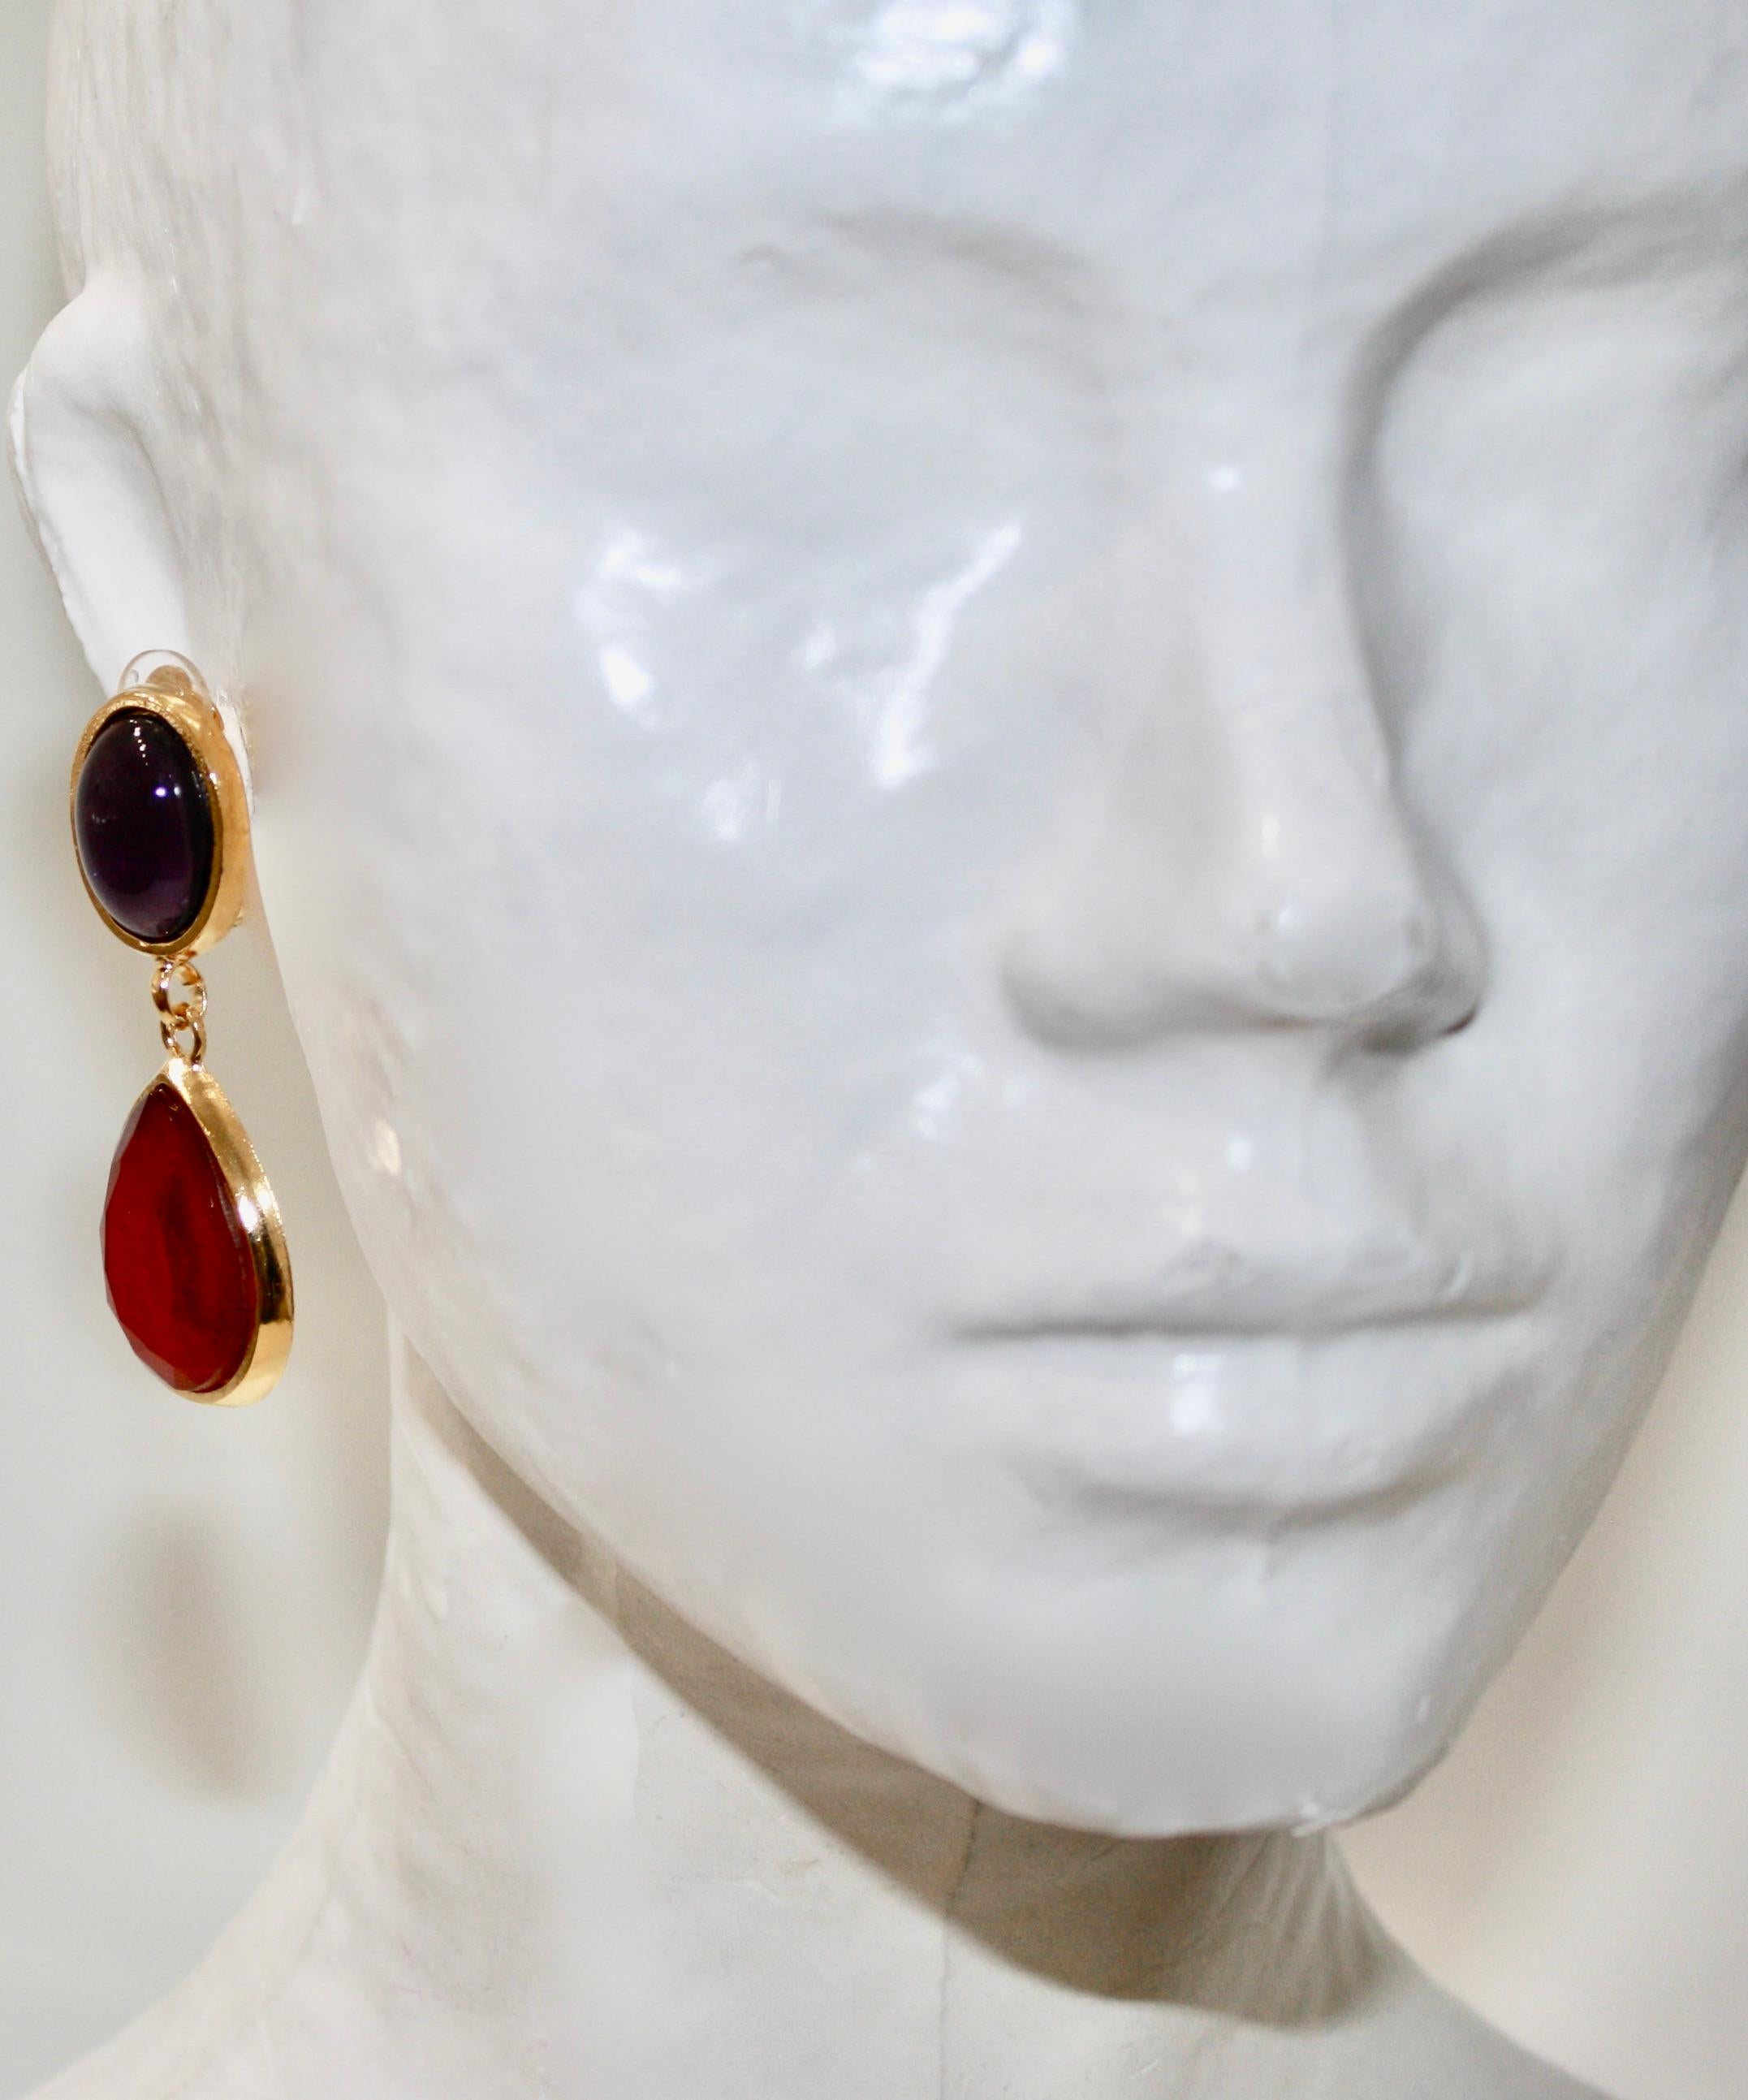 Clip earrings with purple and red resin. 24-carat gilded brass.
Signature on the back
Philippe Ferrandis, French luxury designer. His jewels are hand-made in his workshops in Paris, in the respect of an exceptional know-how.
He has been a parurier